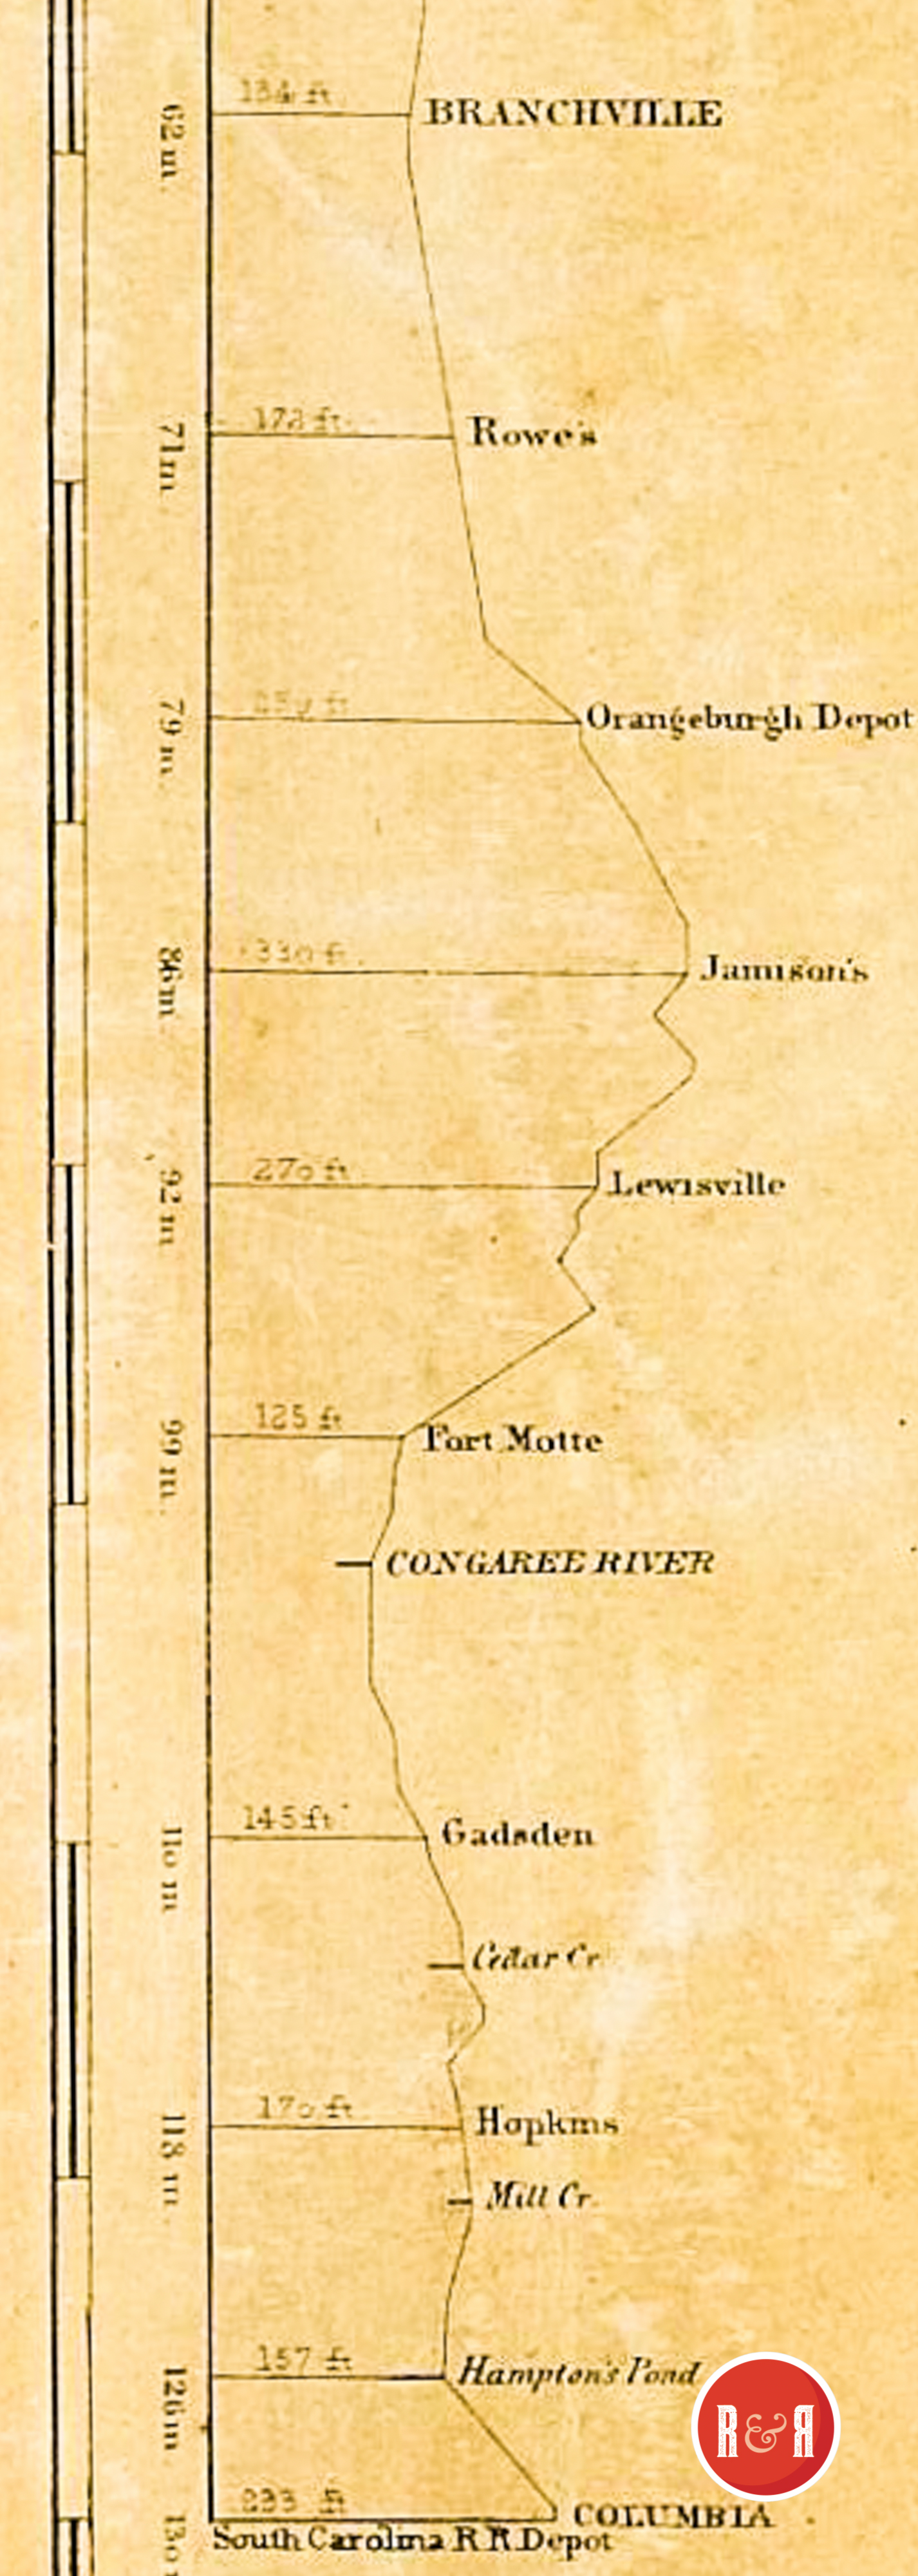 COLTON'S 1854 CHART OF STOPS ALONG THE RAILROAD - ENLARGEMENT